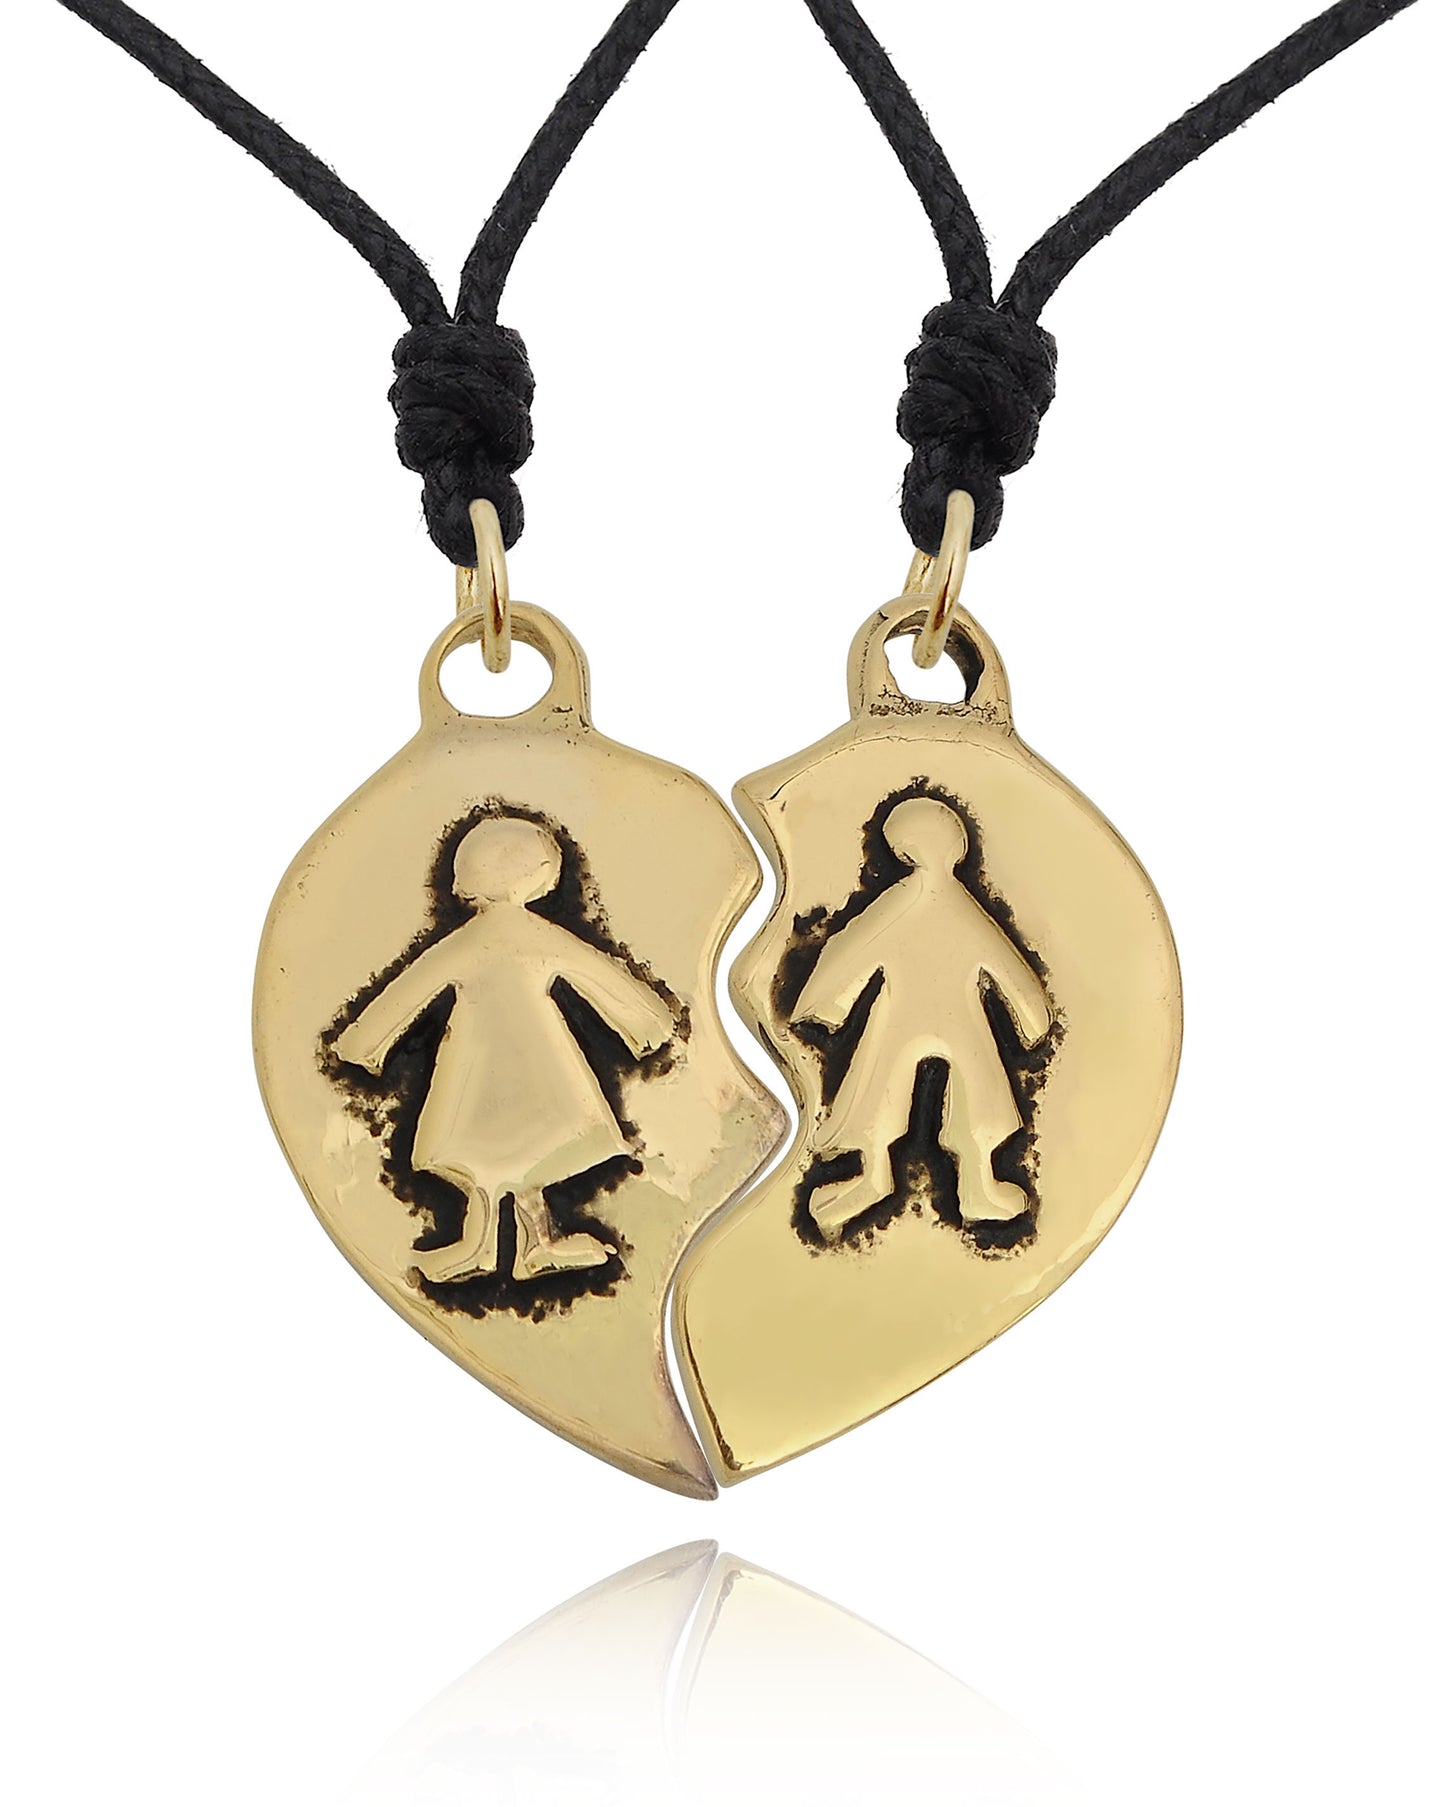 Bestfriend Couple Pendant Silver Pewter Gold Brass Charm Necklace Pendant Jewelr